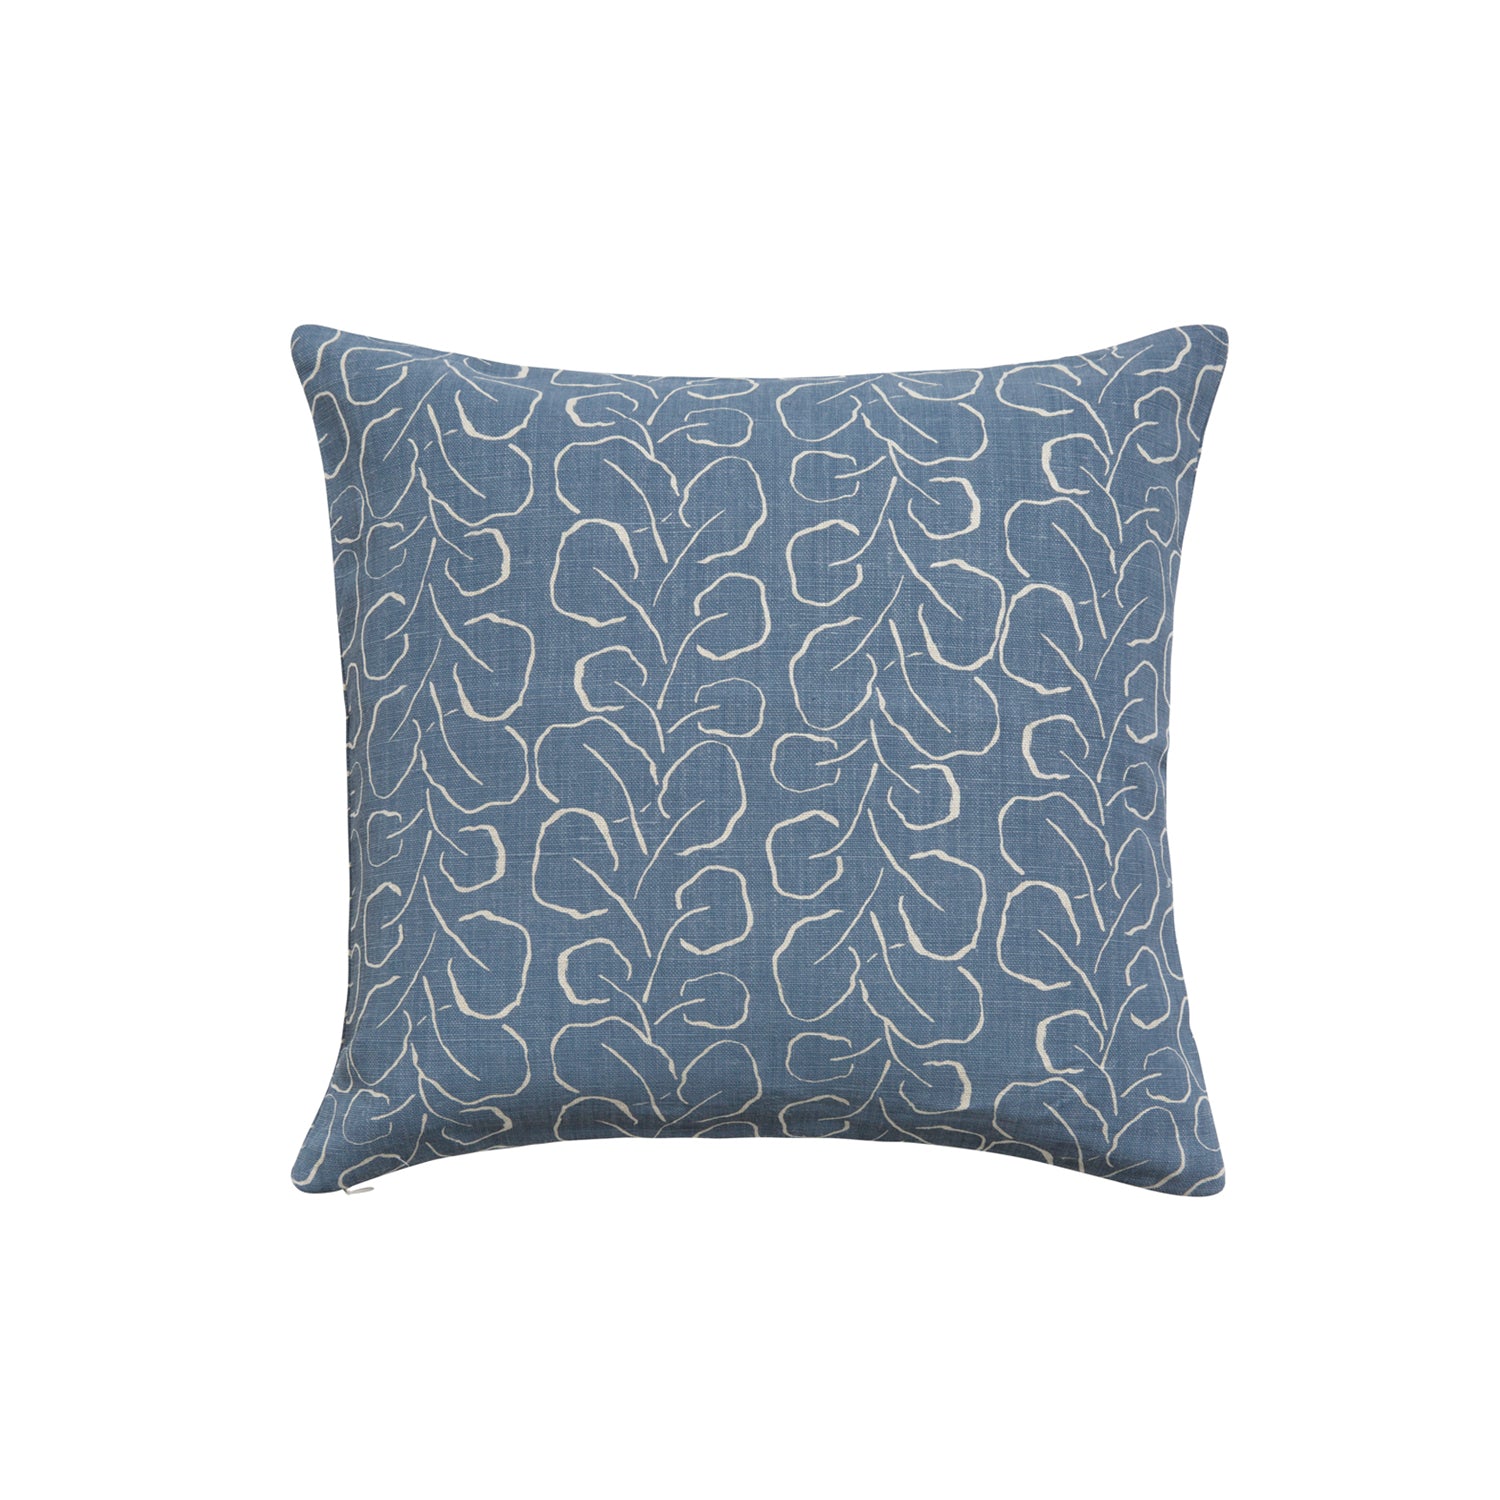 Square throw pillow with a large-scale repeating leaf print in tan on a French blue field.